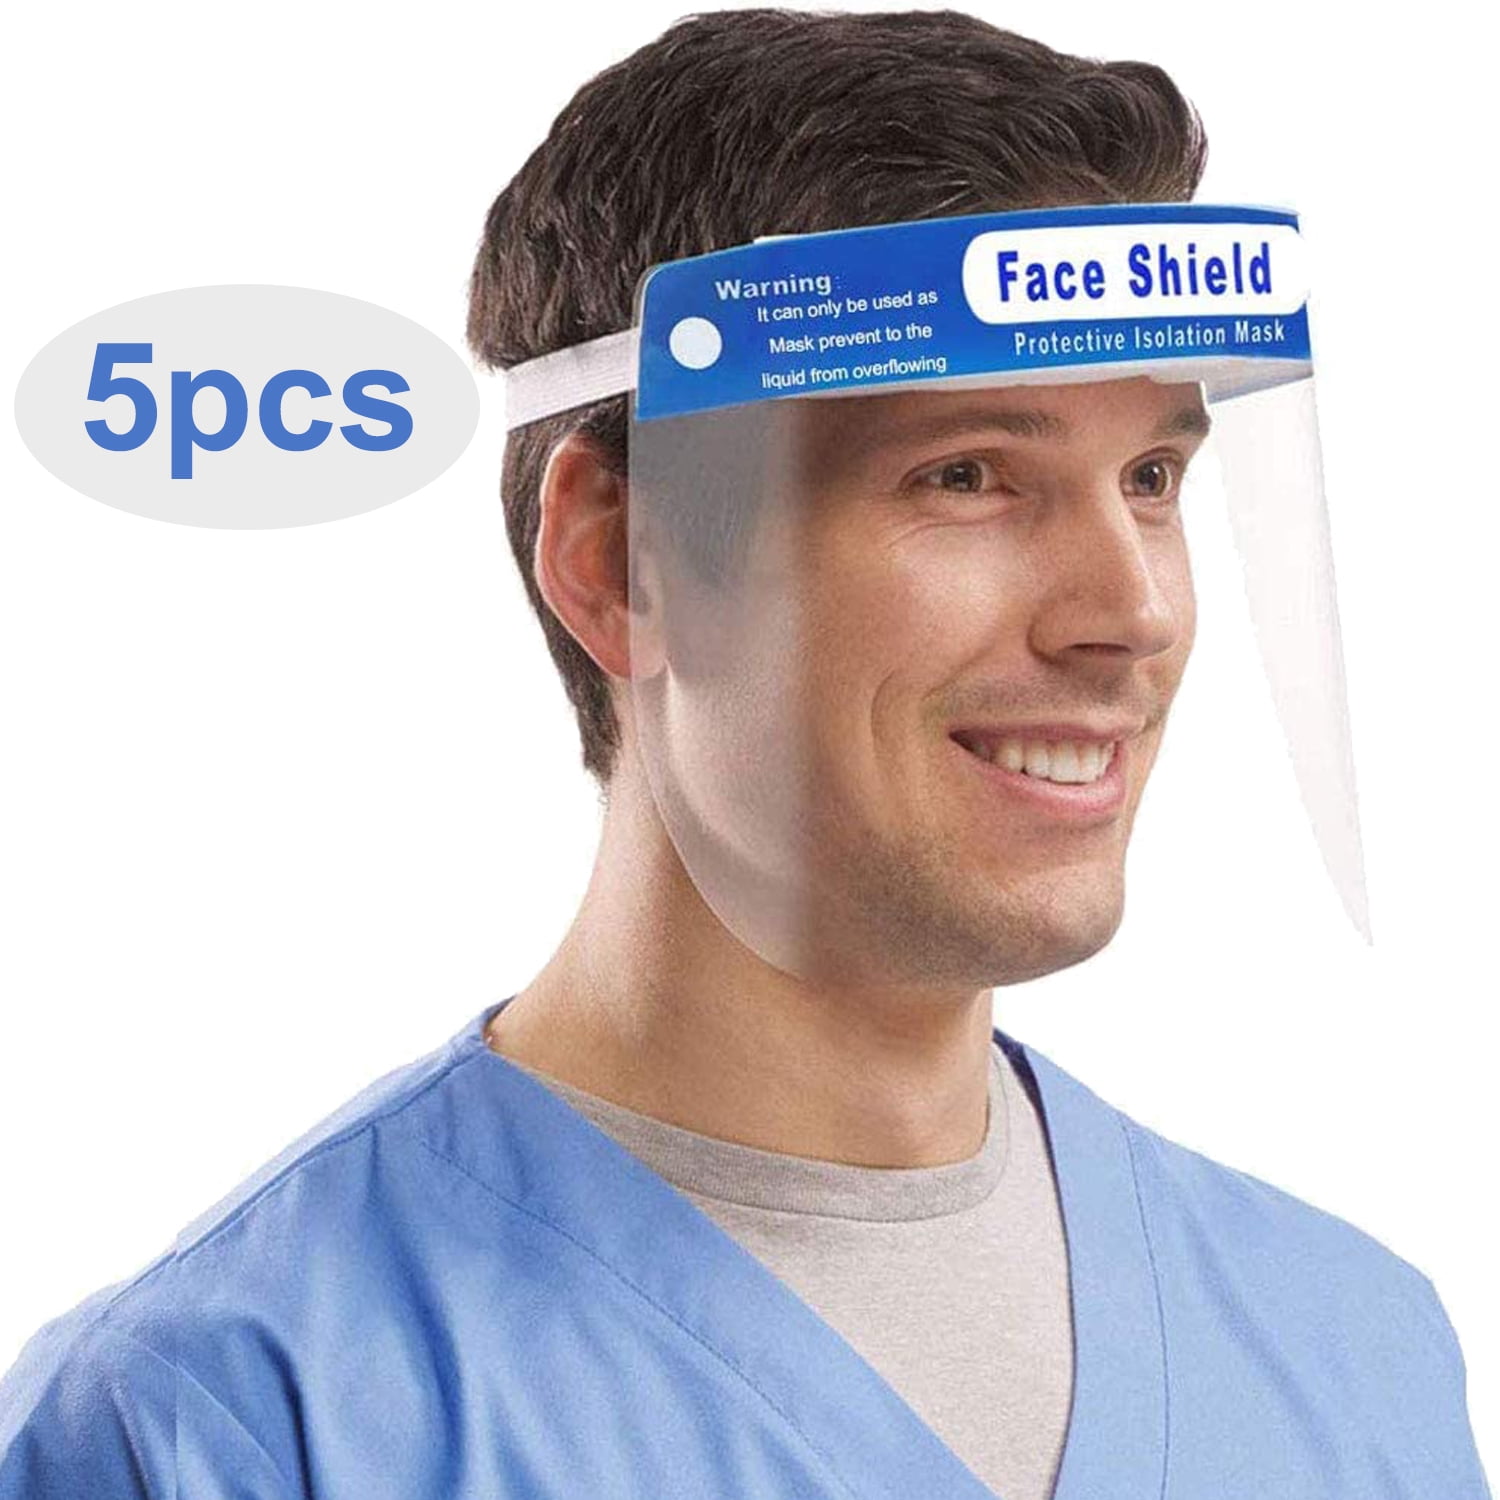 Details about   Safety Face Shield Full Face Clear Anti Fog Transparent Work Industry E 209 